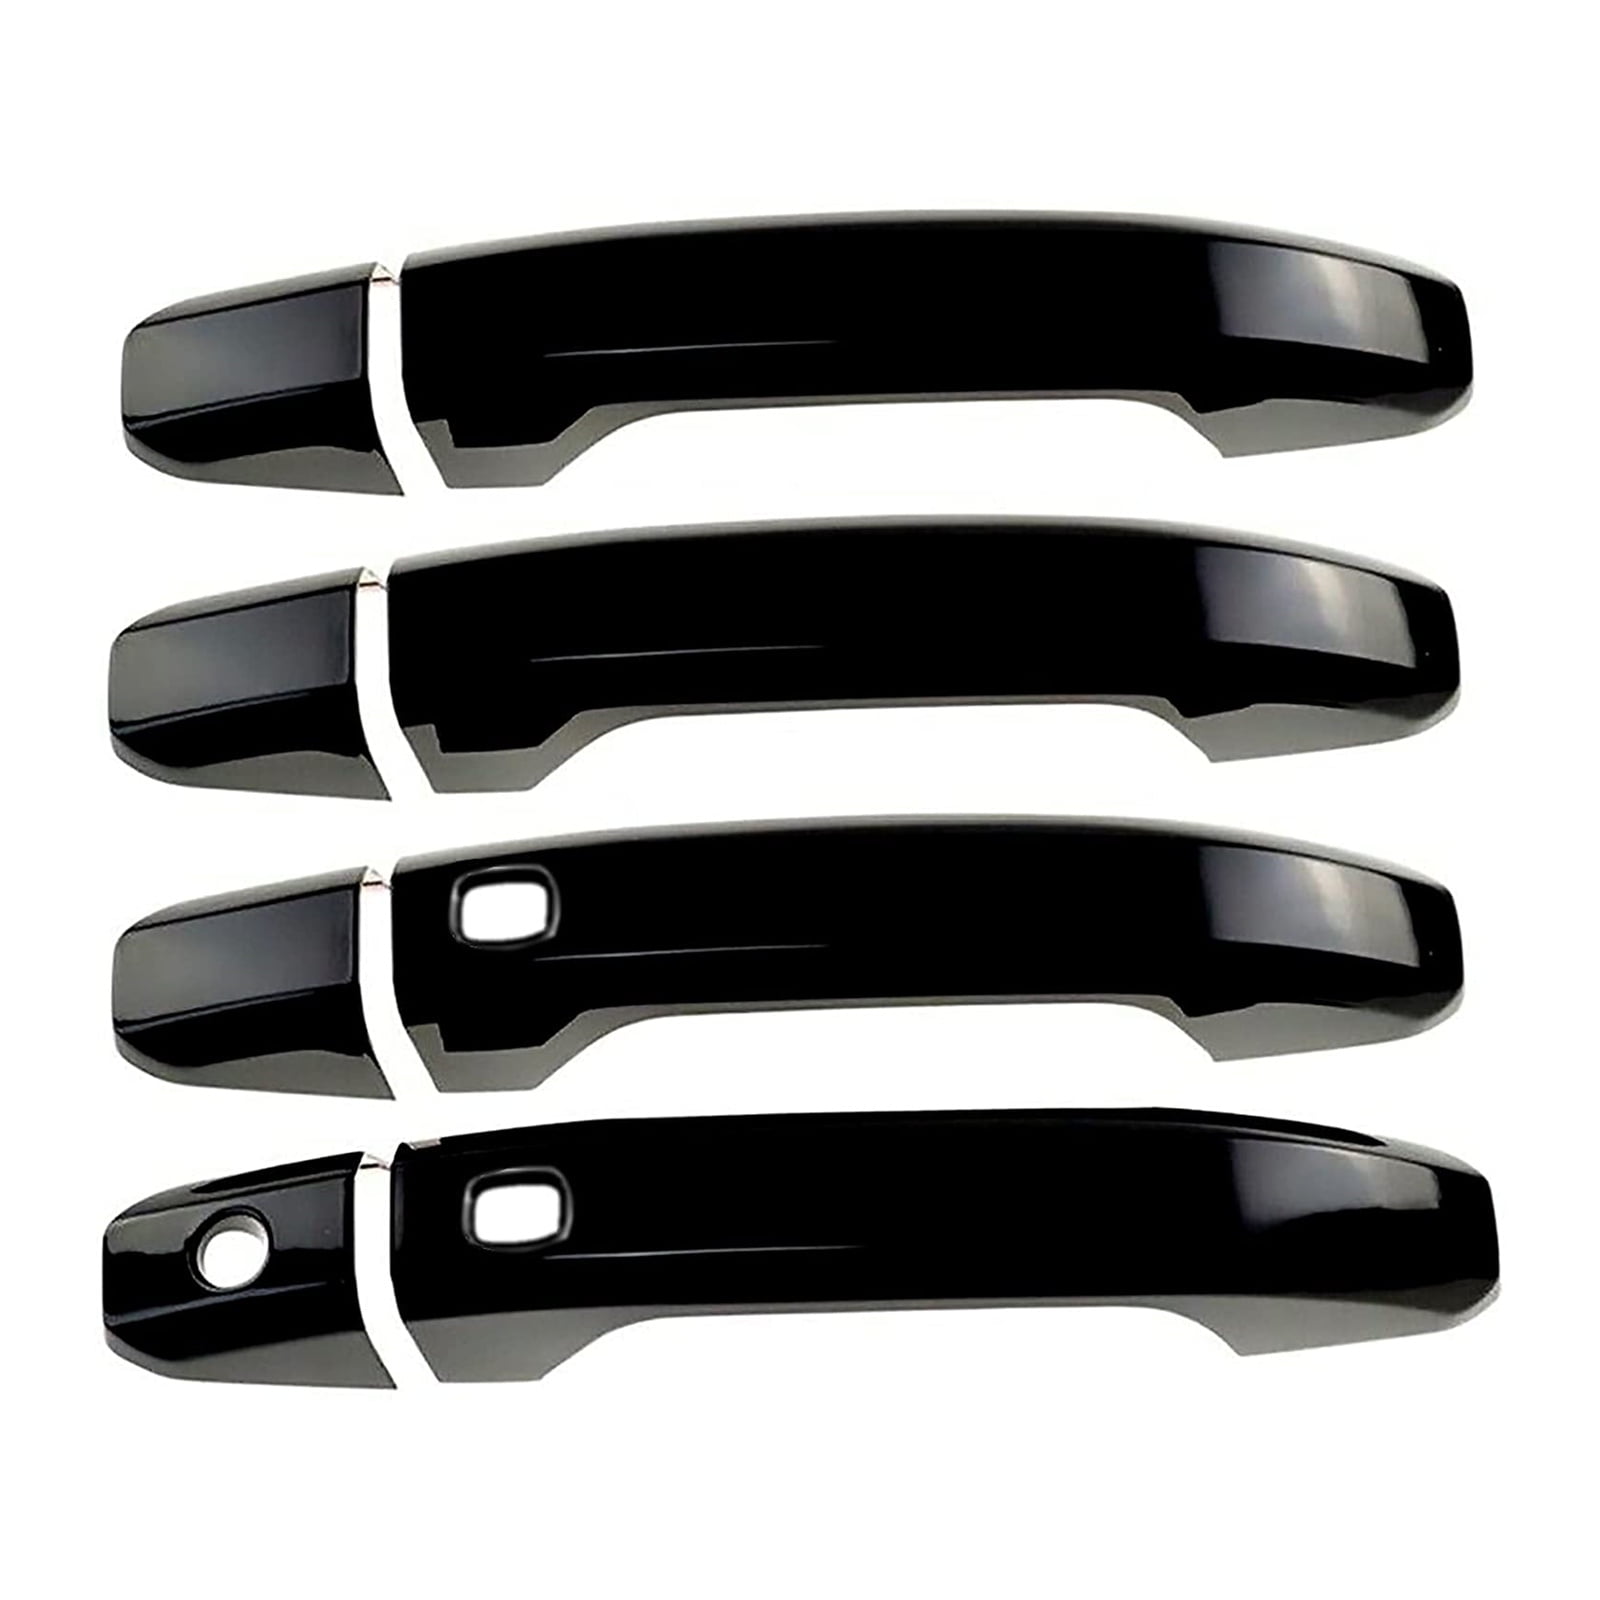 SecosAutoparts 4PCS Black Door Handle Cover Compatible with Chevy